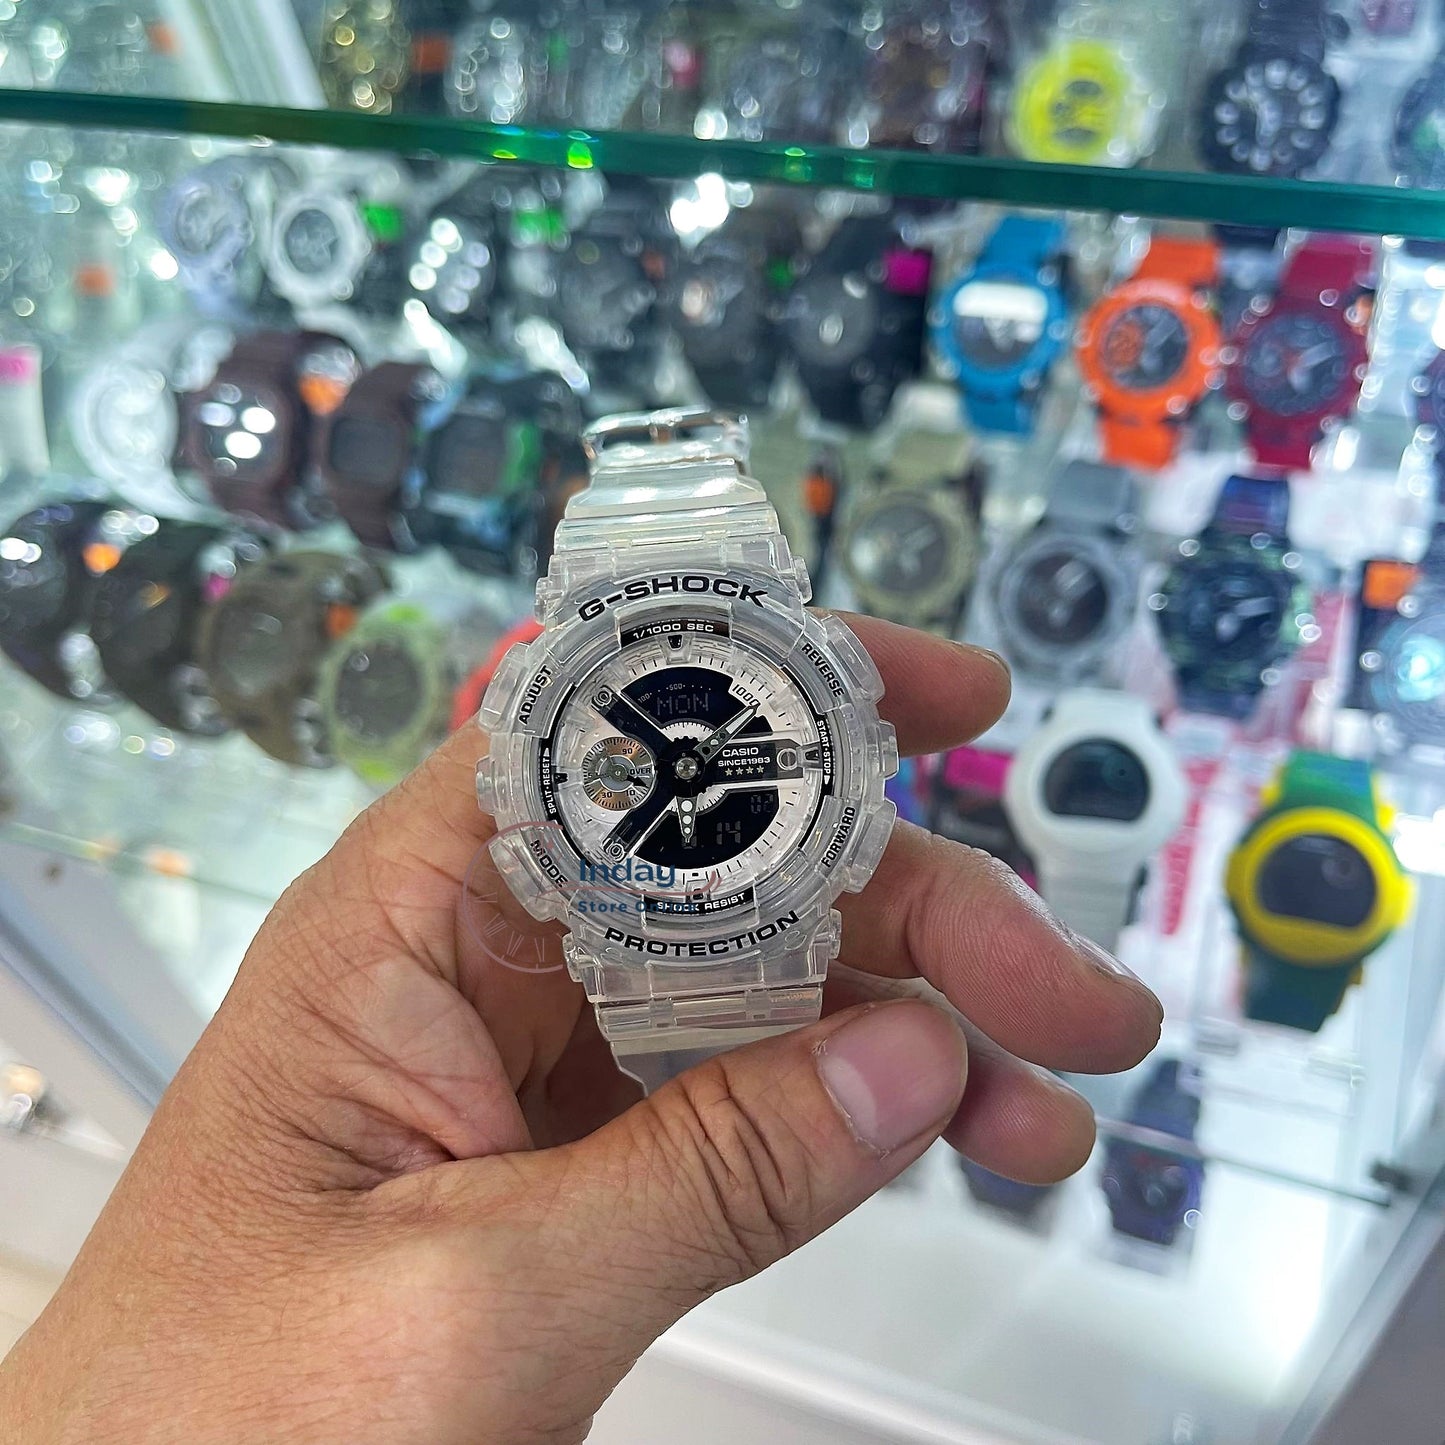 Casio G-Shock Women's Watch GMA-S114RX-7A Analog-Digital 40th Anniversary CLEAR REMIX Limited Edition